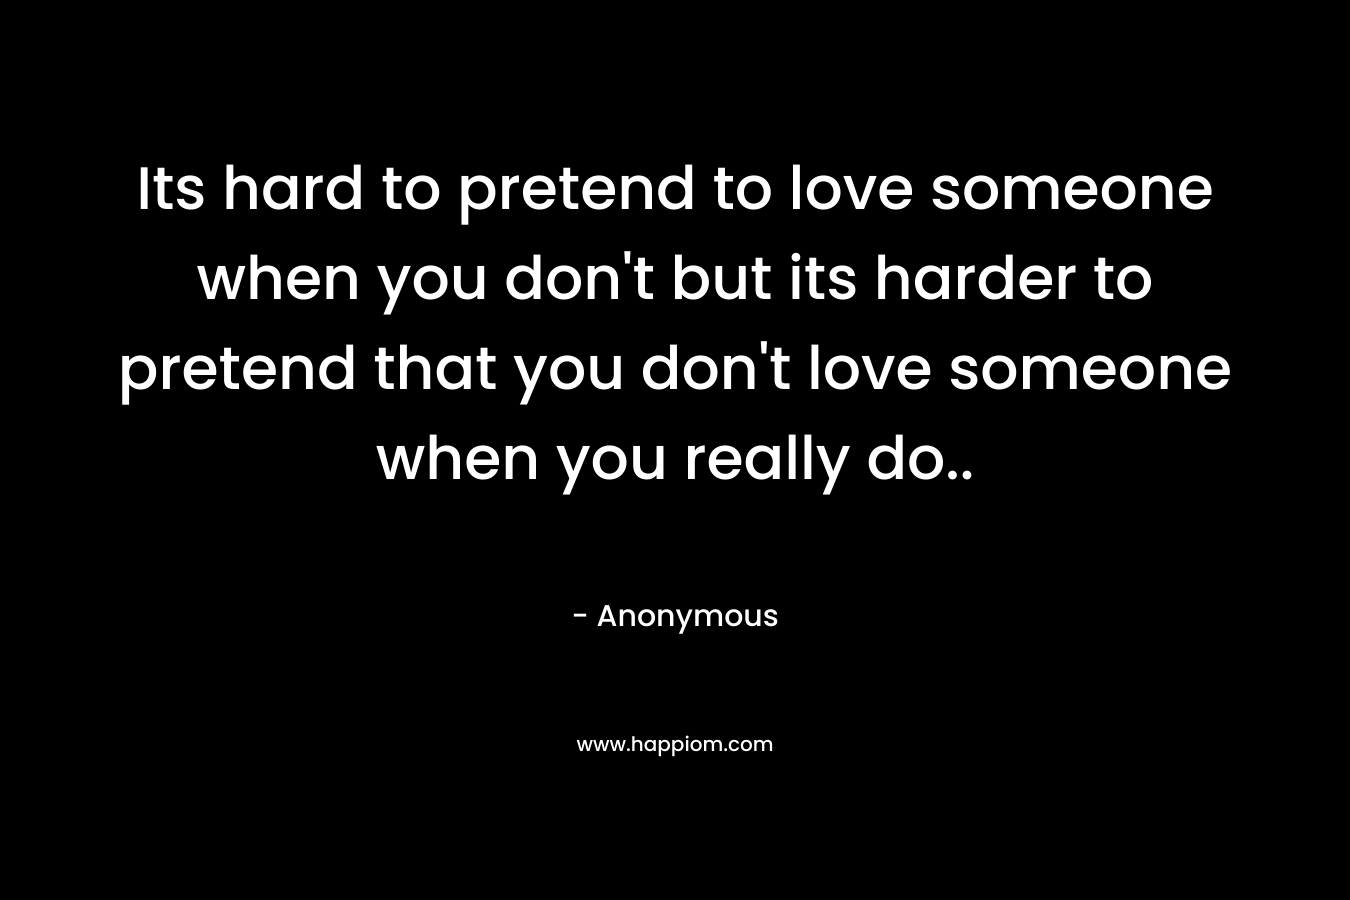 Its hard to pretend to love someone when you don’t but its harder to pretend that you don’t love someone when you really do.. – Anonymous